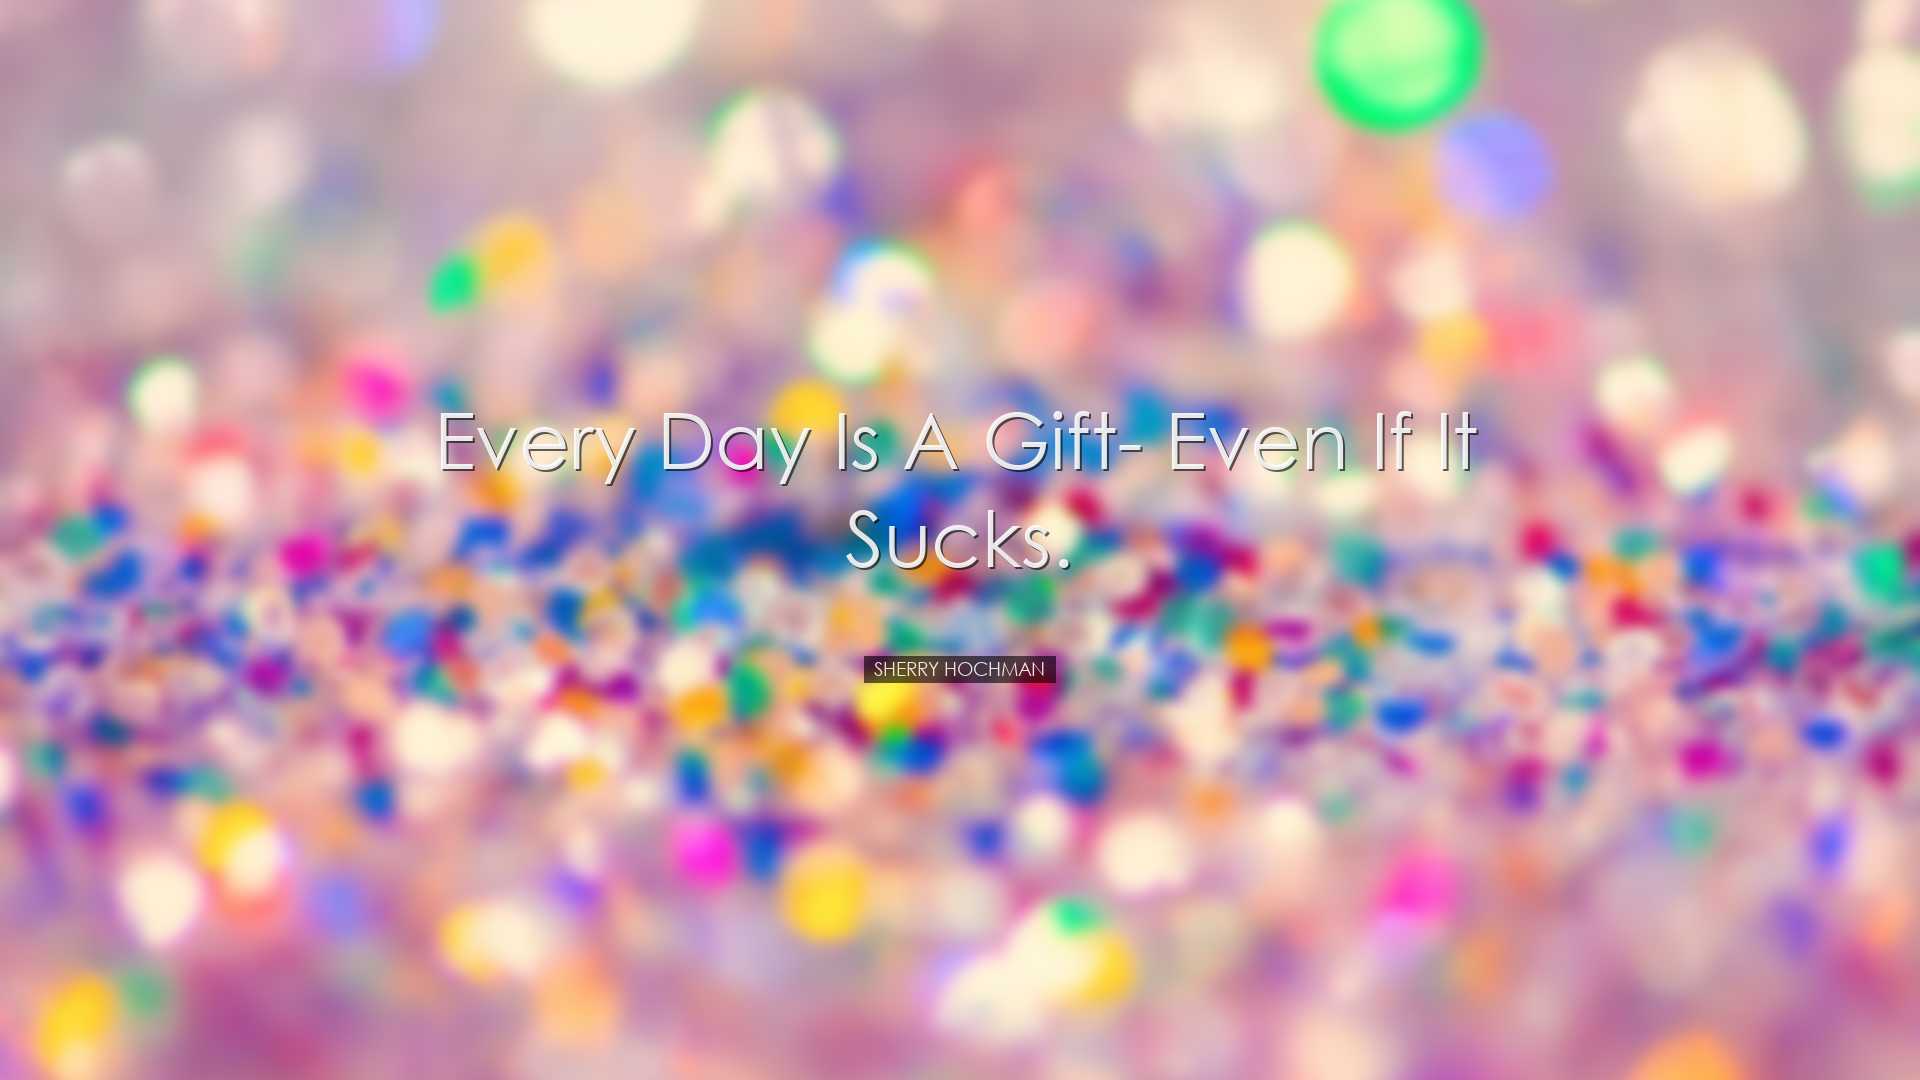 Every day is a gift- even if it sucks. - Sherry Hochman